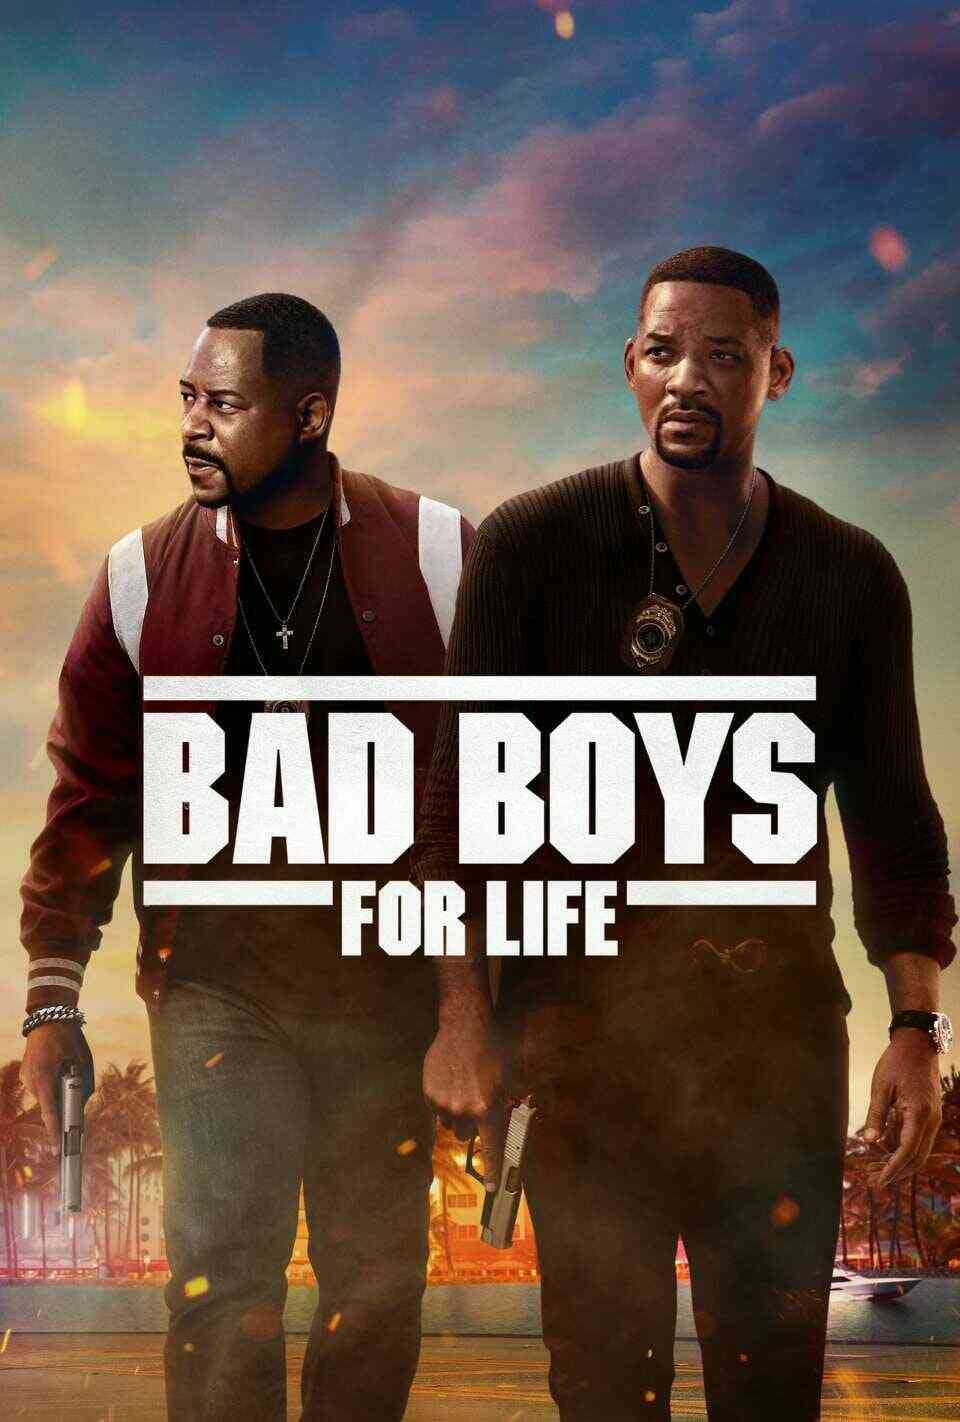 Read Bad Boys for Life screenplay (poster)